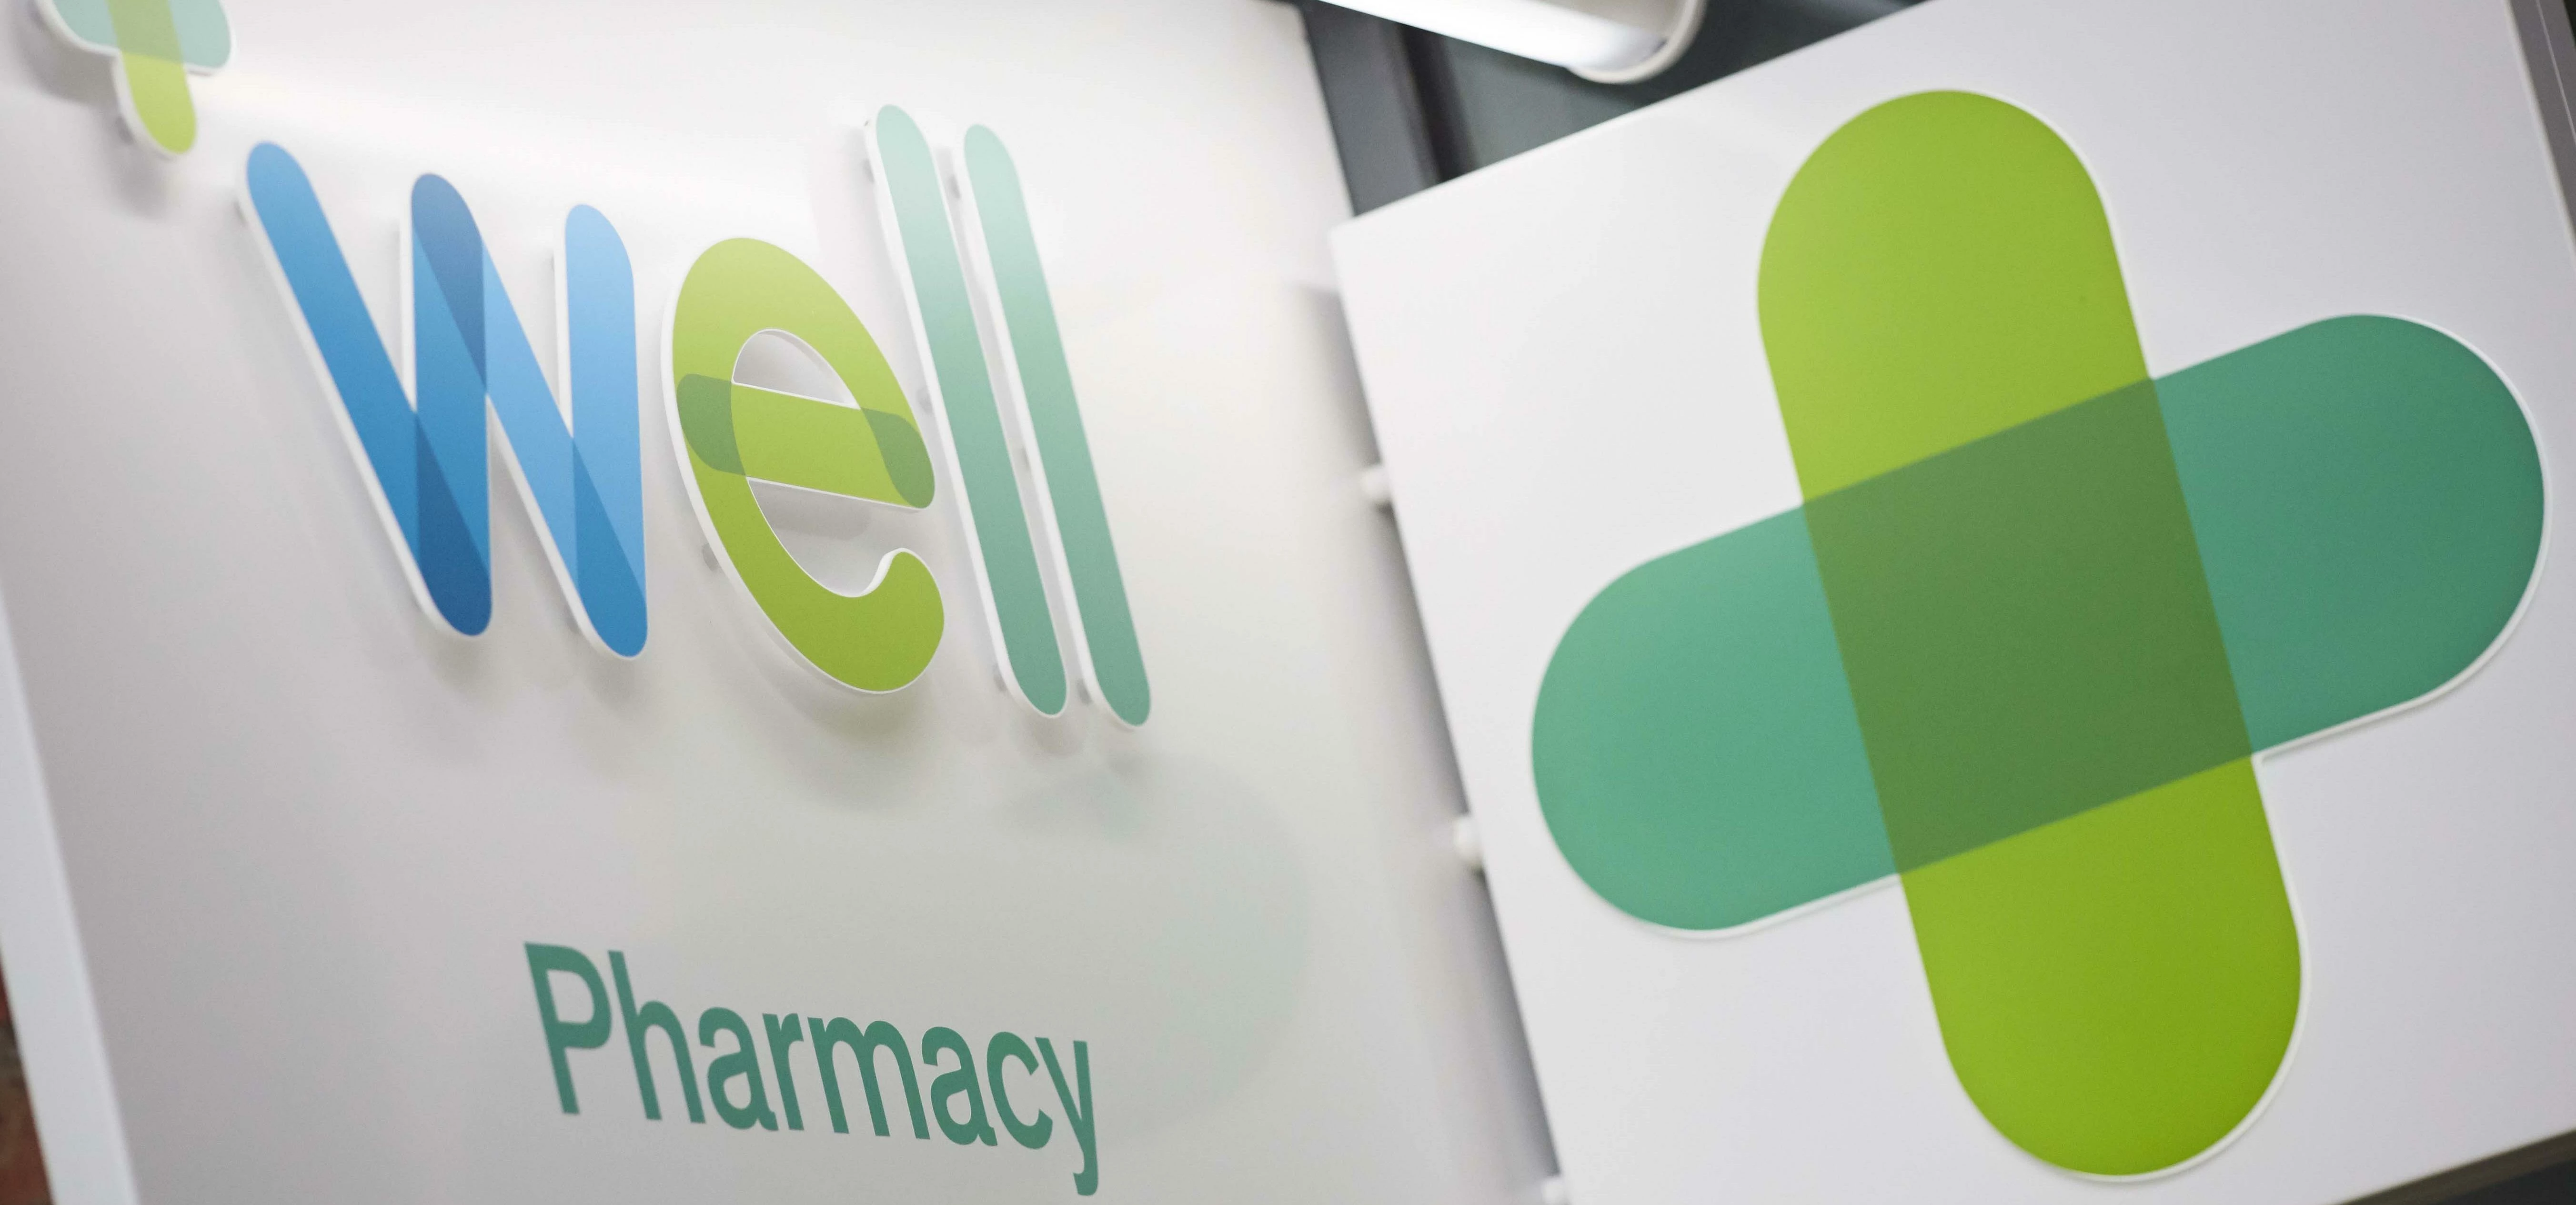 Well Pharmacy appoints new Commercial and HR directors